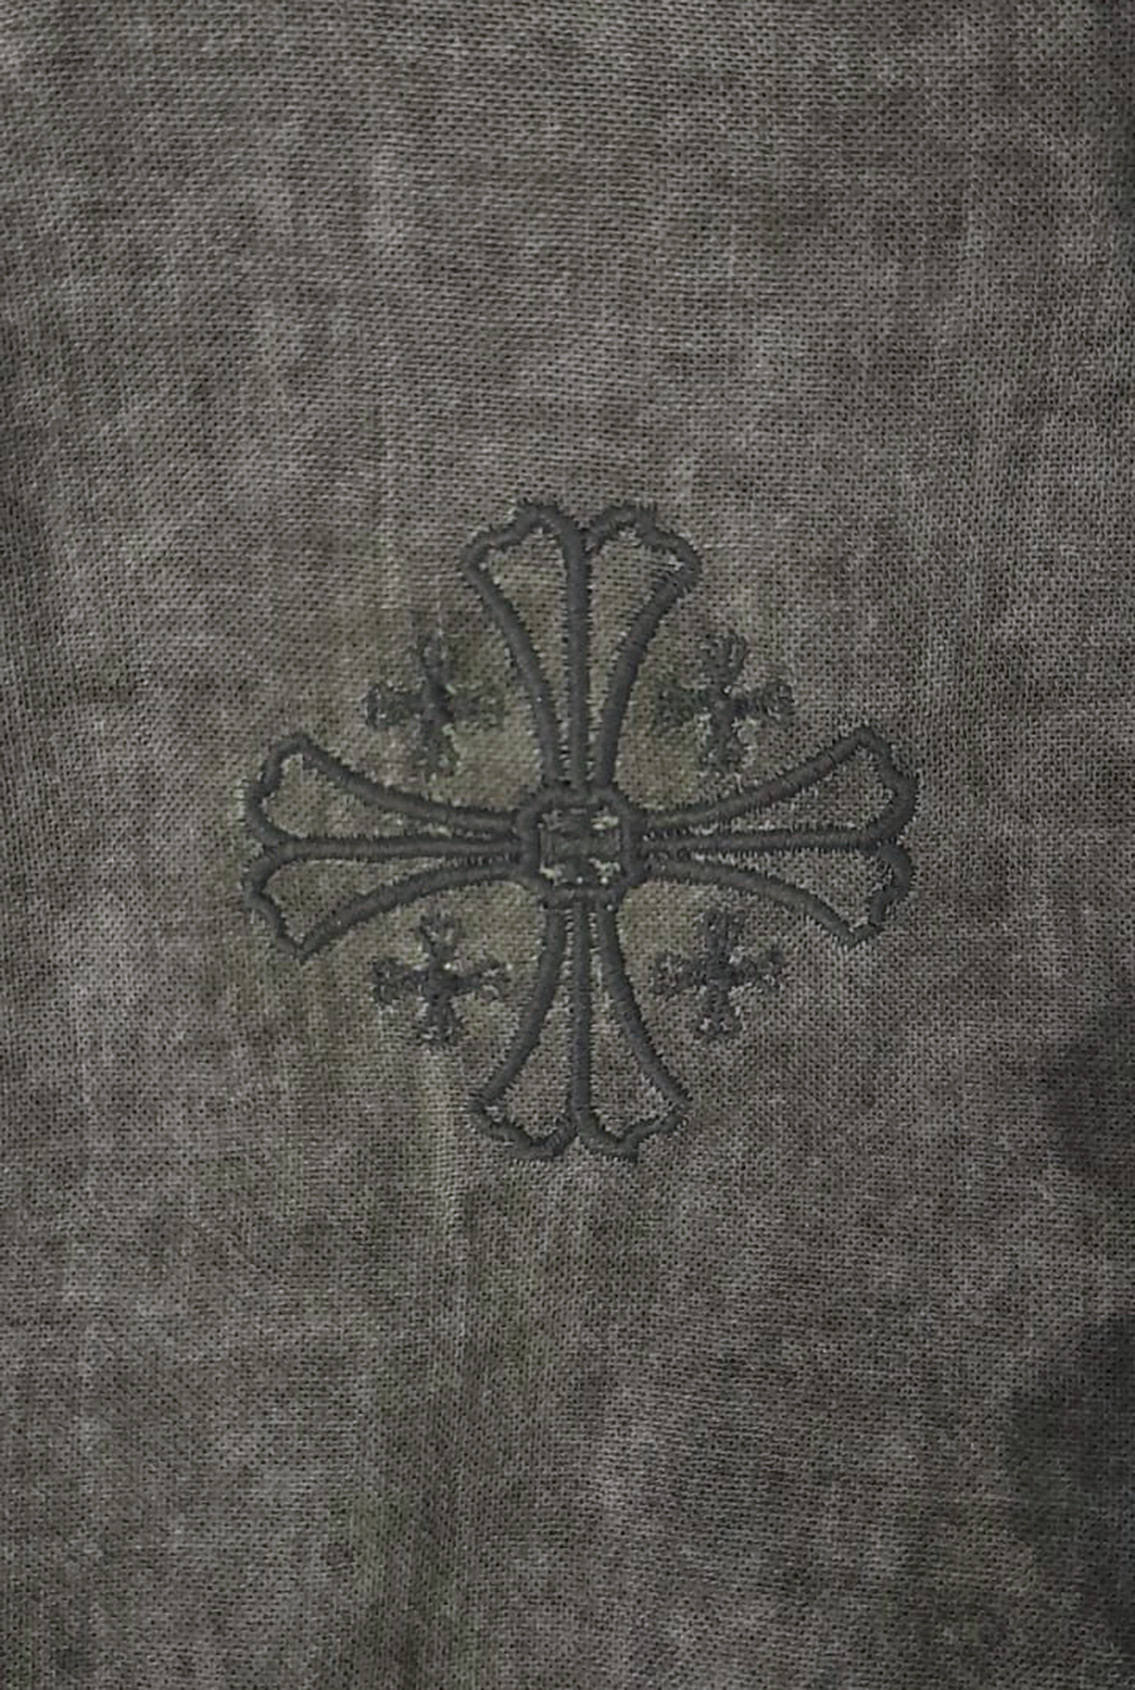 Embroidered cross on clothes